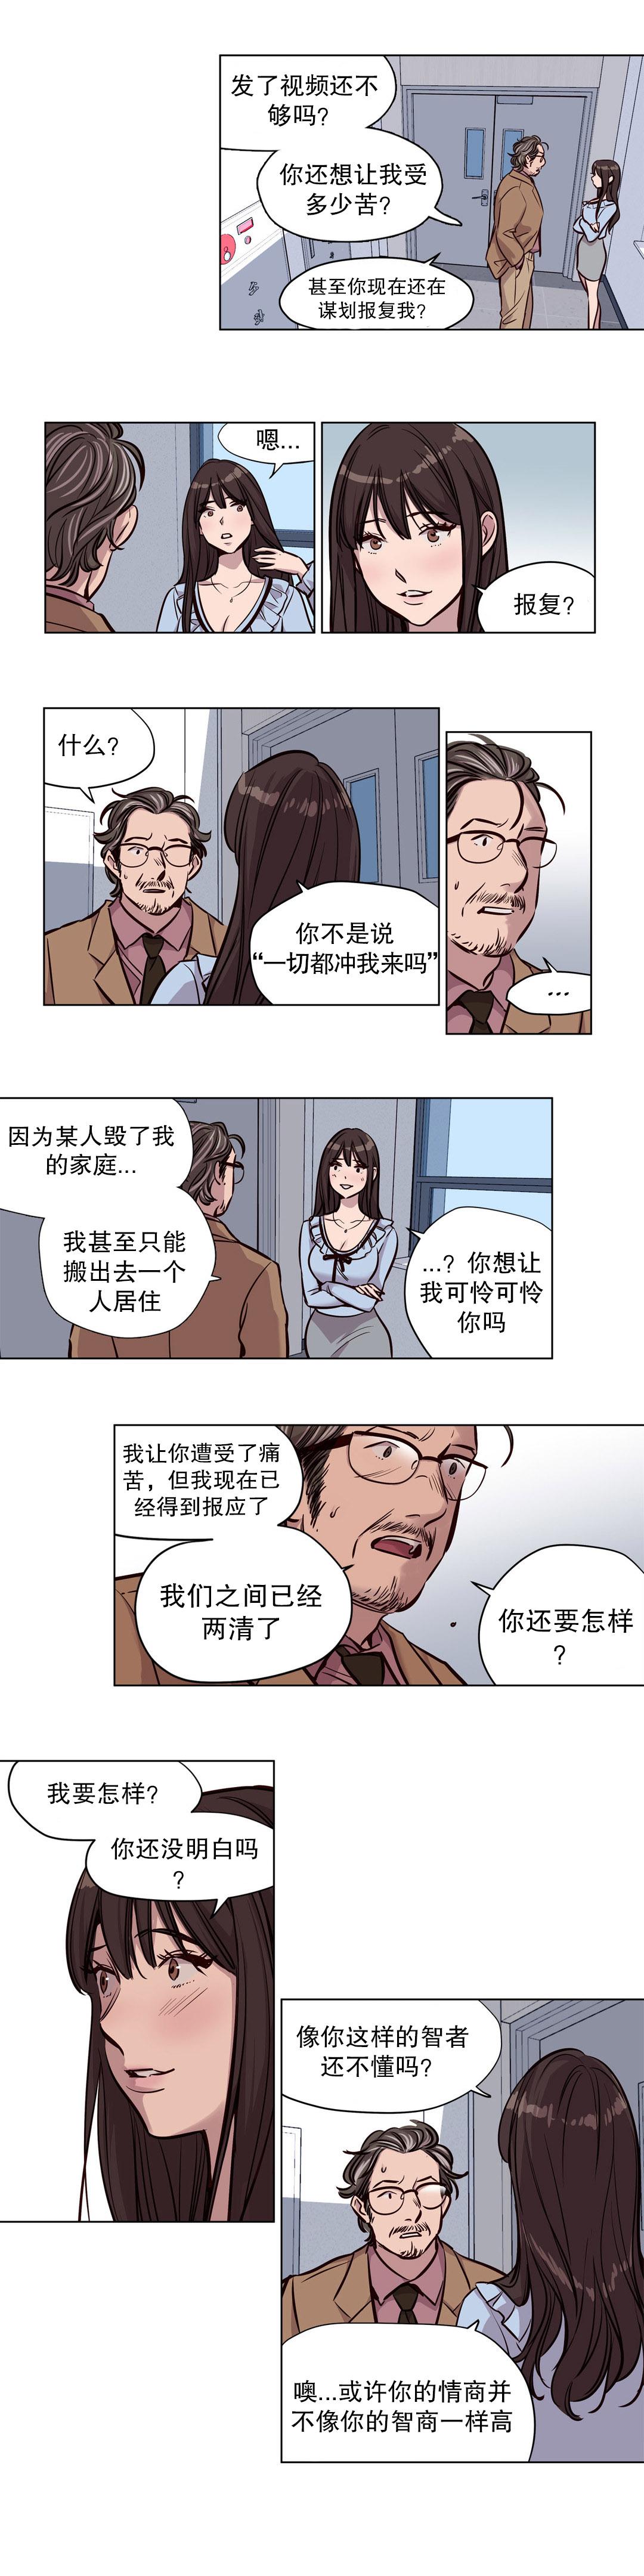 Ex Gf [Ramjak] 赎罪营(Atonement Camp) Ch.50-52 (Chinese) Freak - Page 10